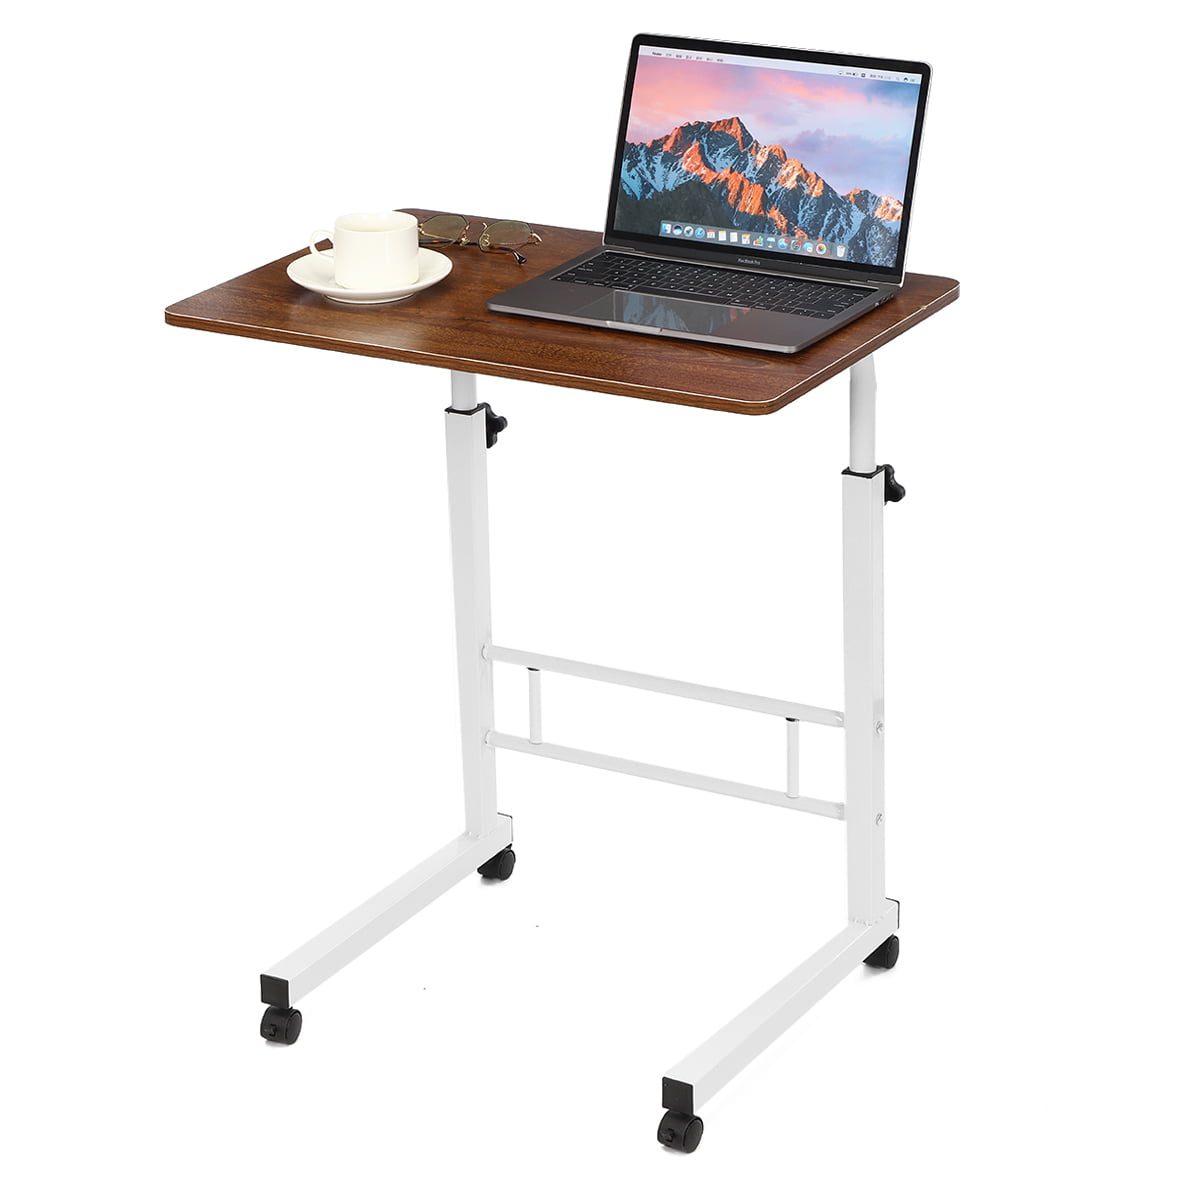 Mobile Side Table Wheels Adjustable Portable Laptop Computer Stand For Bed Sofa 